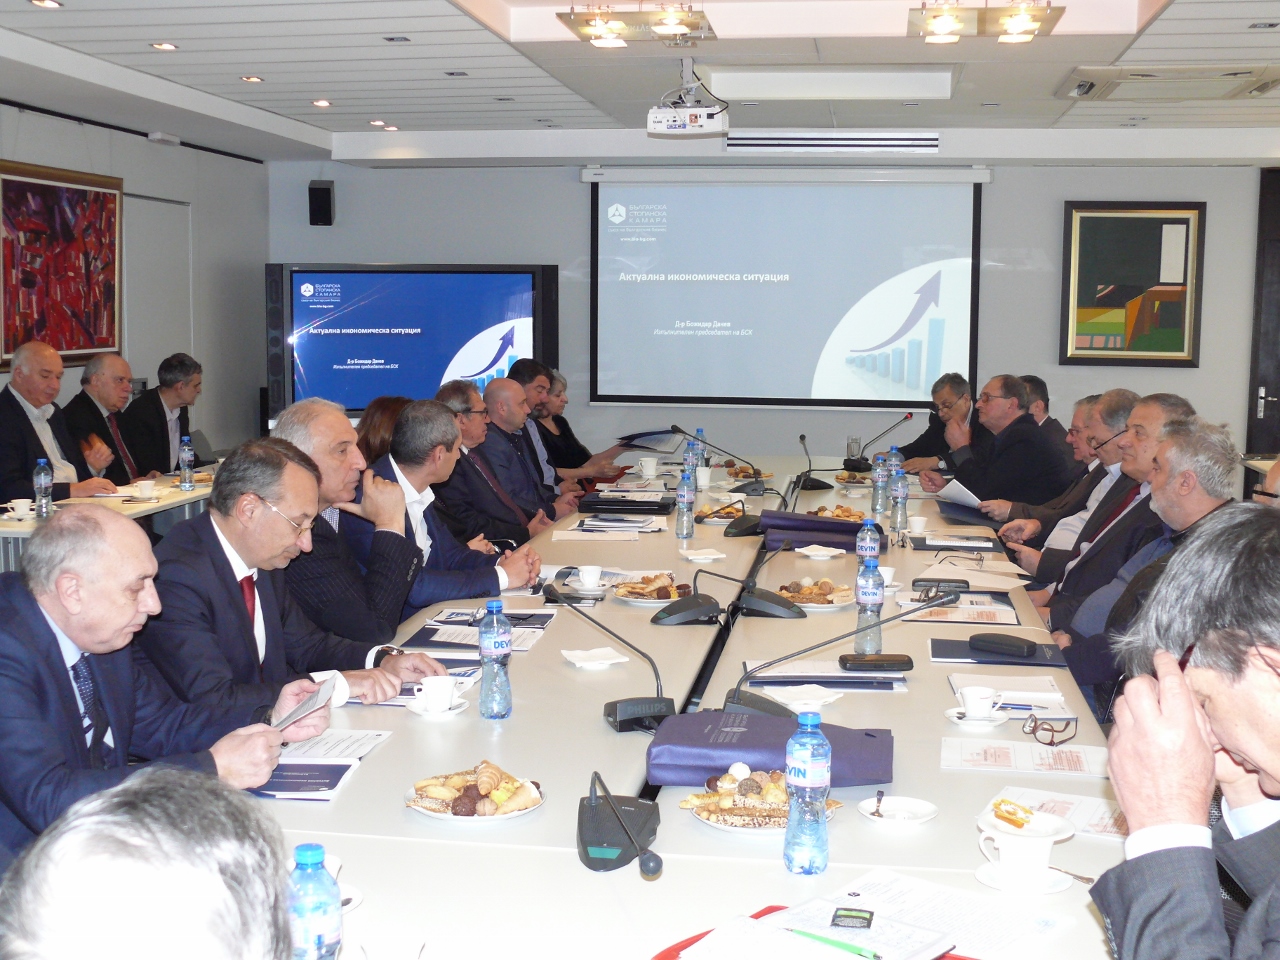 The XXVIII Annual Meeting of Regional Chambers of Commerce and Associations was held